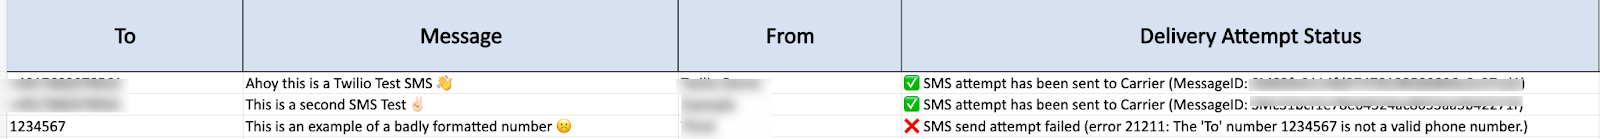 The spreadsheet after the SMS script has run. The Delivery Attempt Status column contains multiple success messages and one failure because the phone number is invalid.